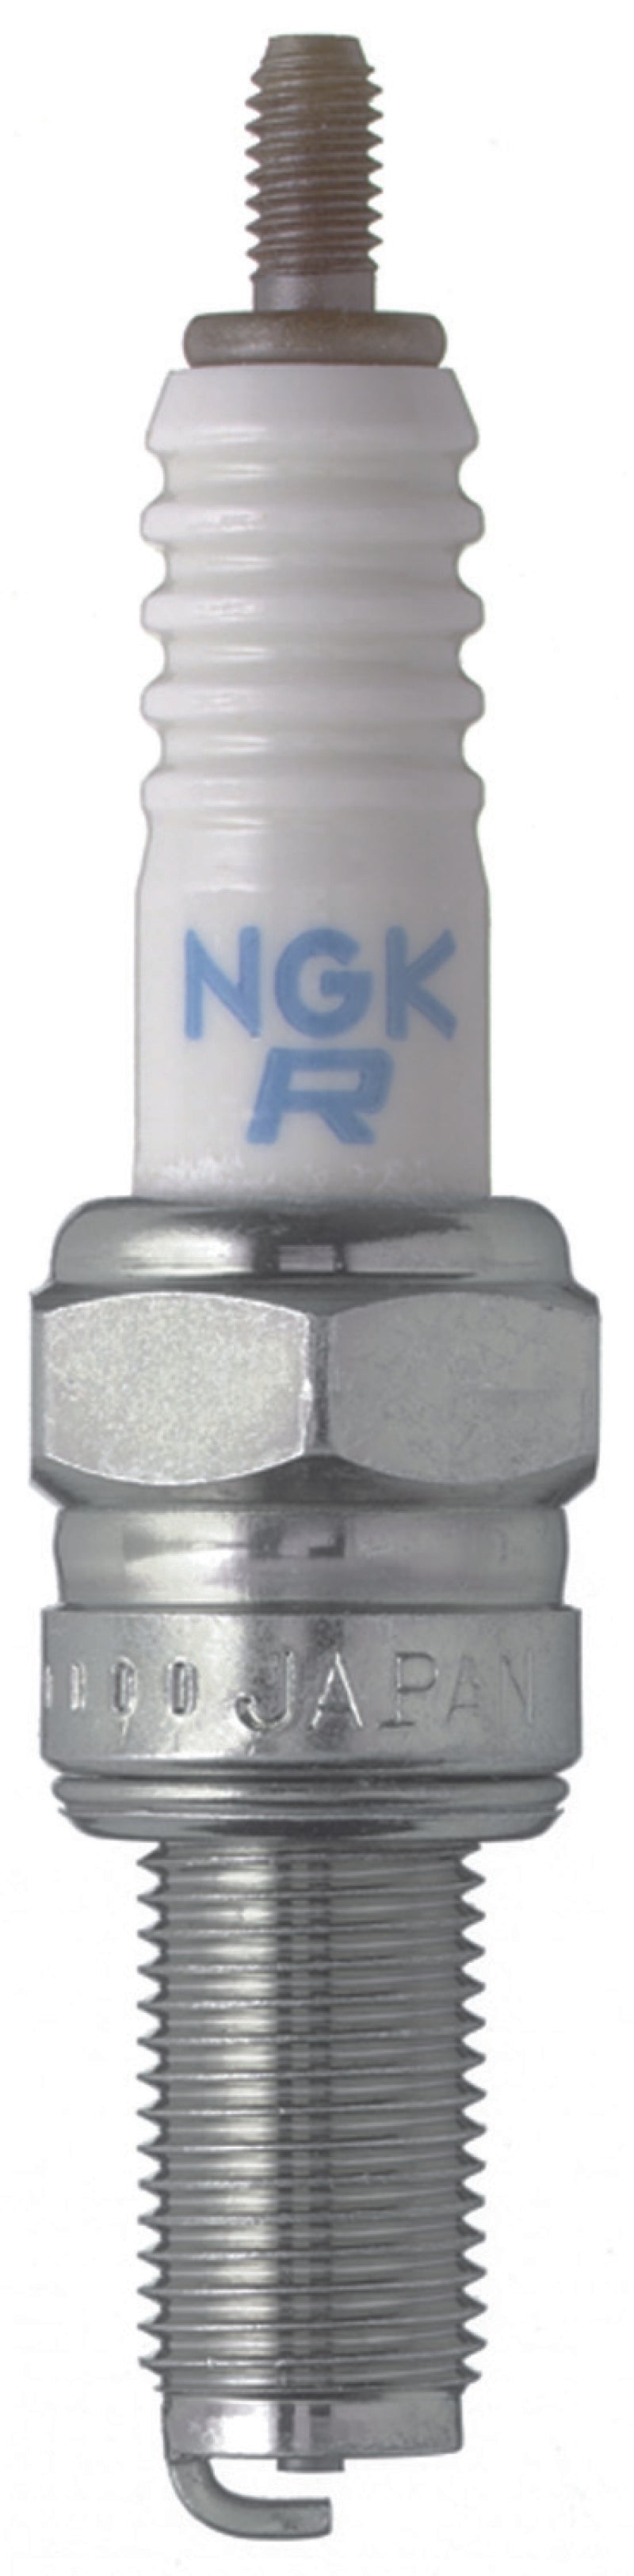 NGK Standard Spark Plug Box of 4 (CR6E) -  Shop now at Performance Car Parts